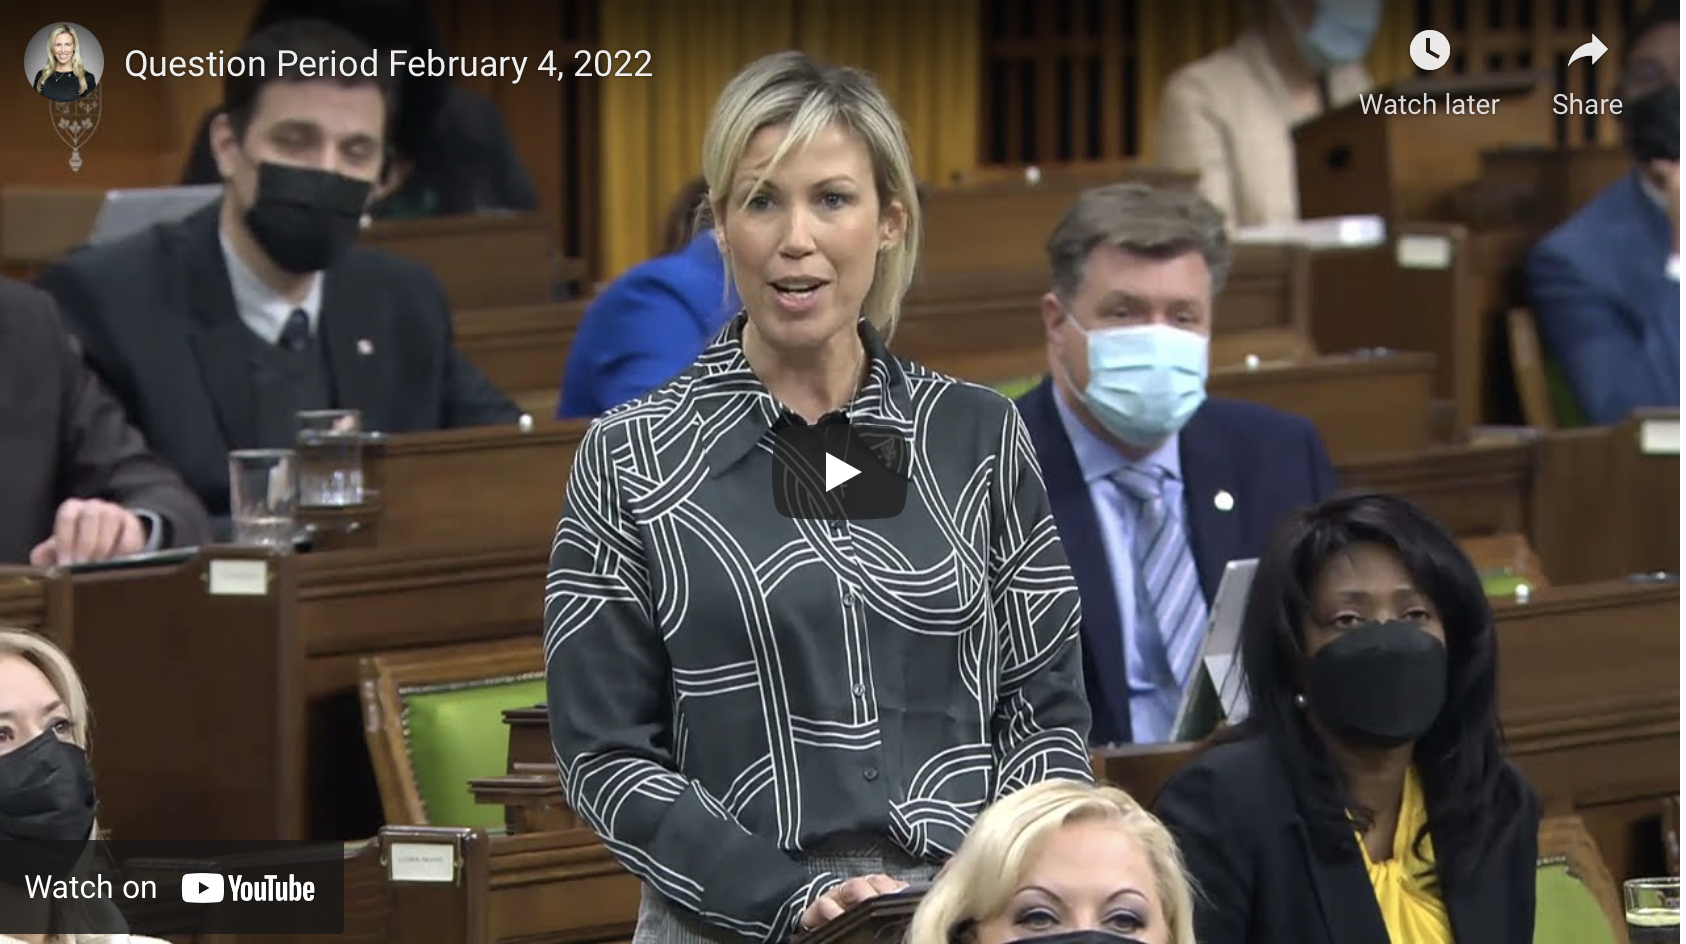 Shelby Kramp Neuman MP standing in the House of Commons on February 4, 2022